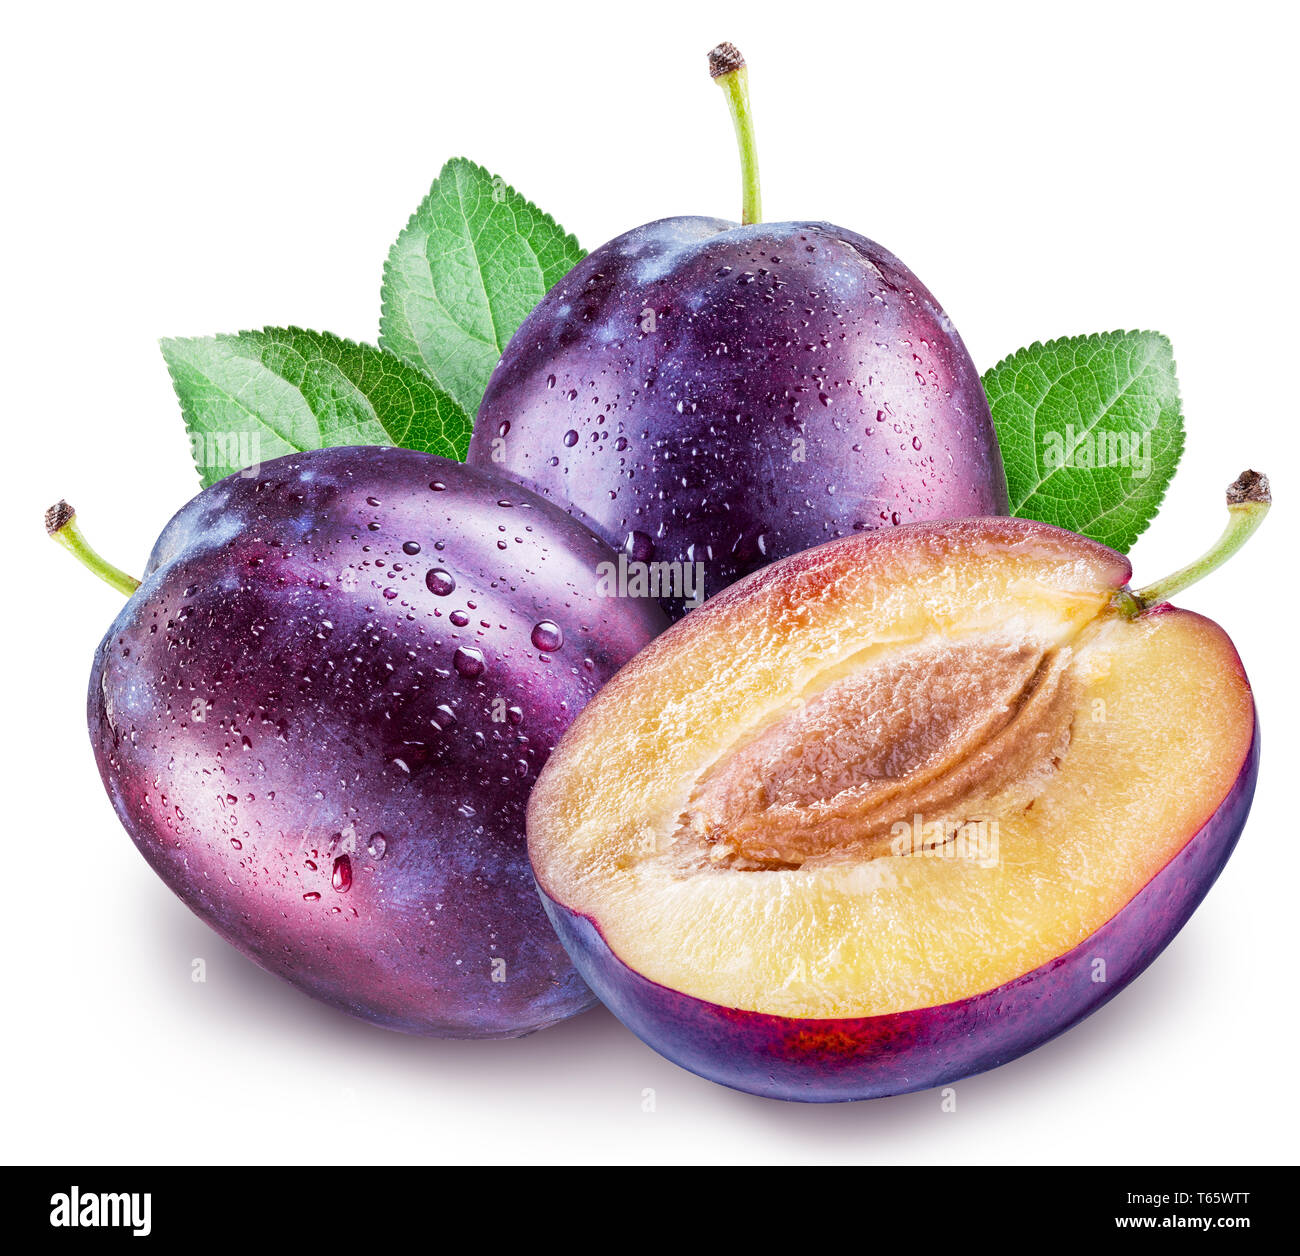 Plums with water drops on a white background. File contains clipping path. Stock Photo